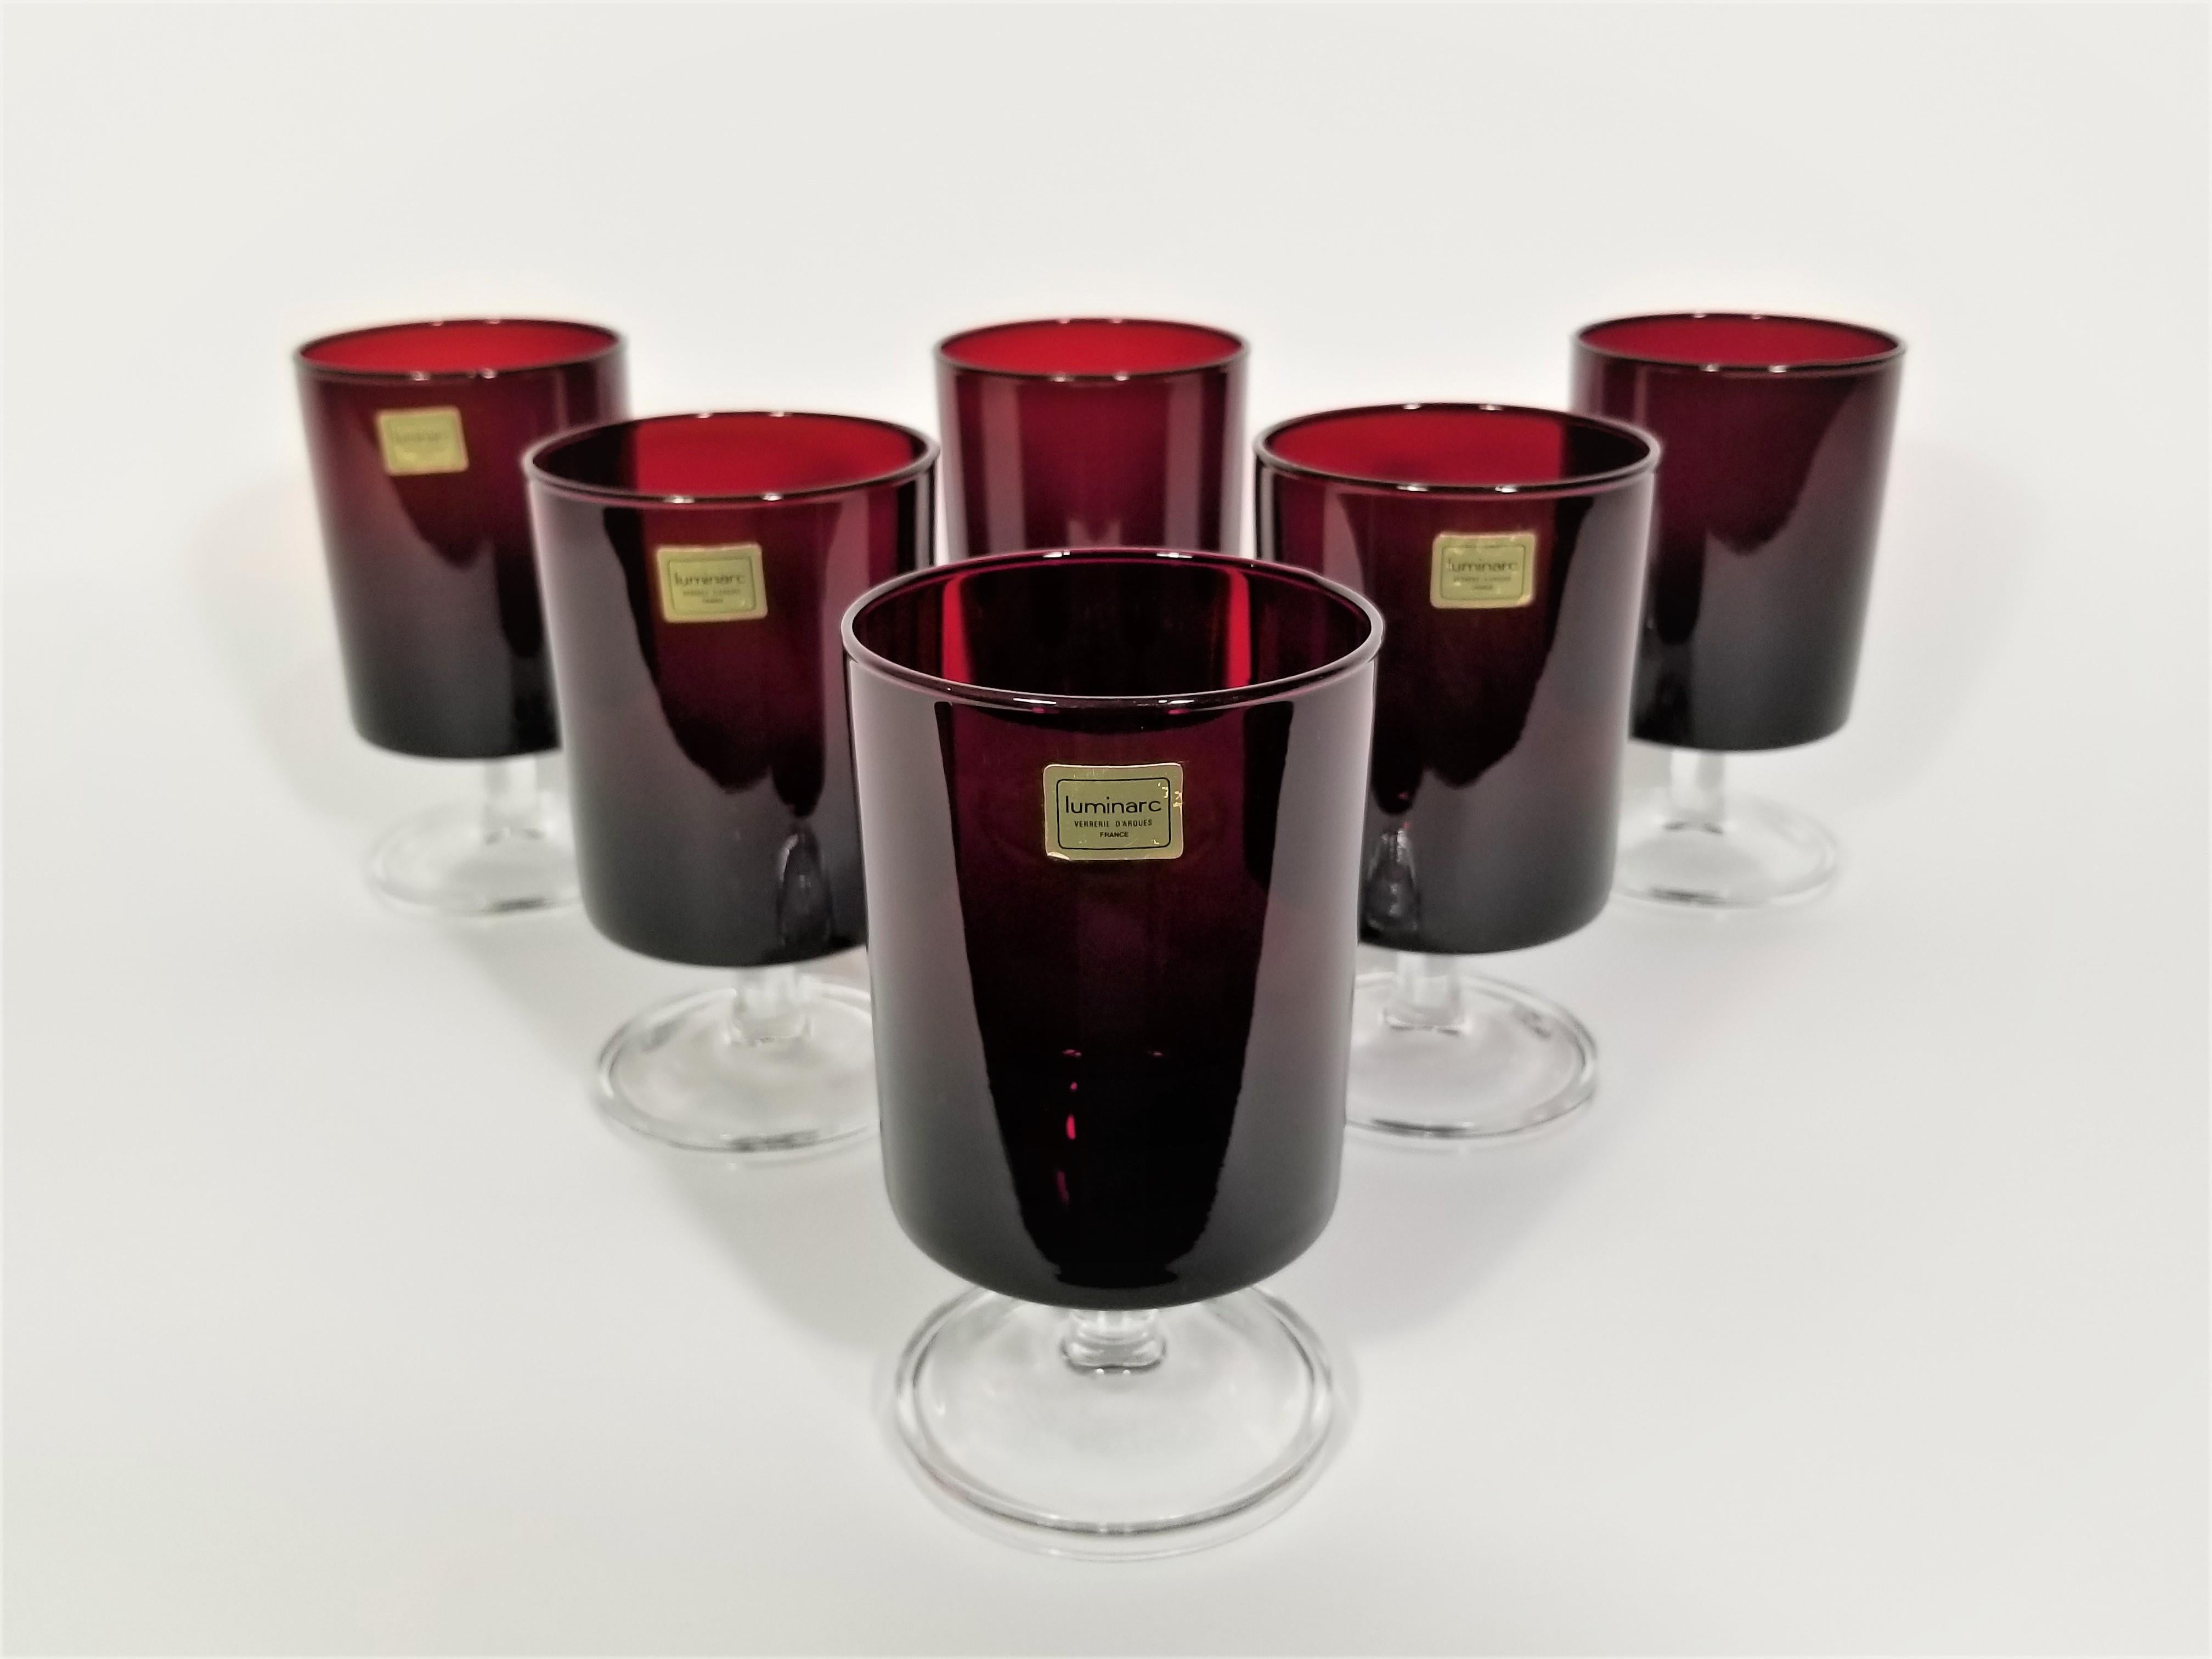 French mid century 1960s Luminarc Glassware Stemware barware. Made in France. All glasses marked France on bottom. Still retain original Luminarc marking stickers. Ruby red with clear stems. Set of 6.